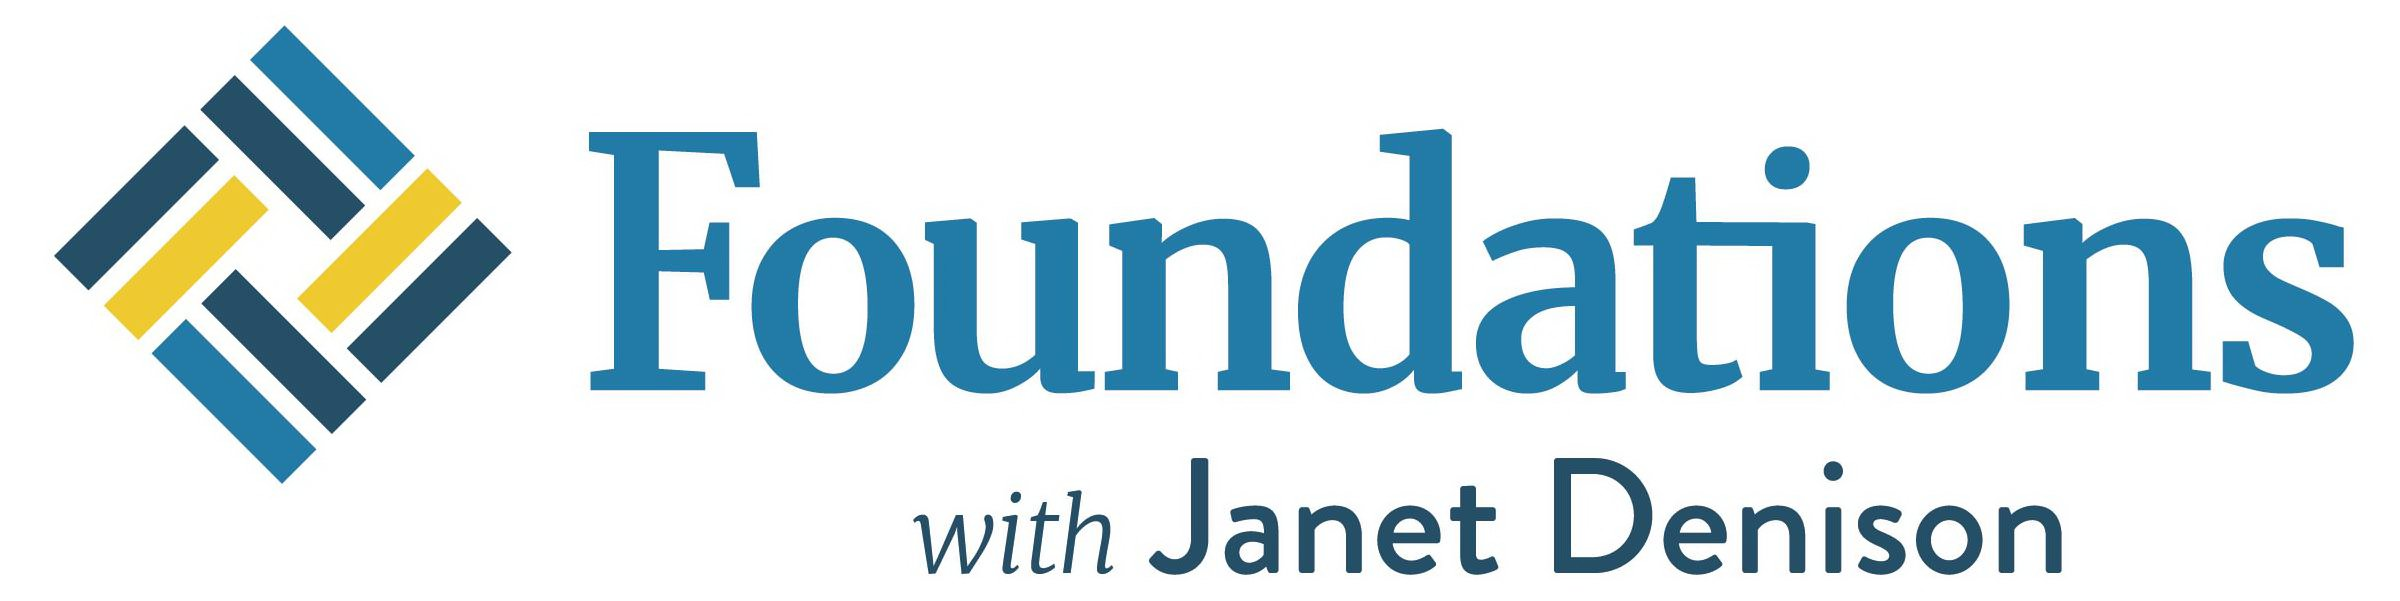 Trademark Logo FOUNDATIONS WITH JANET DENISON